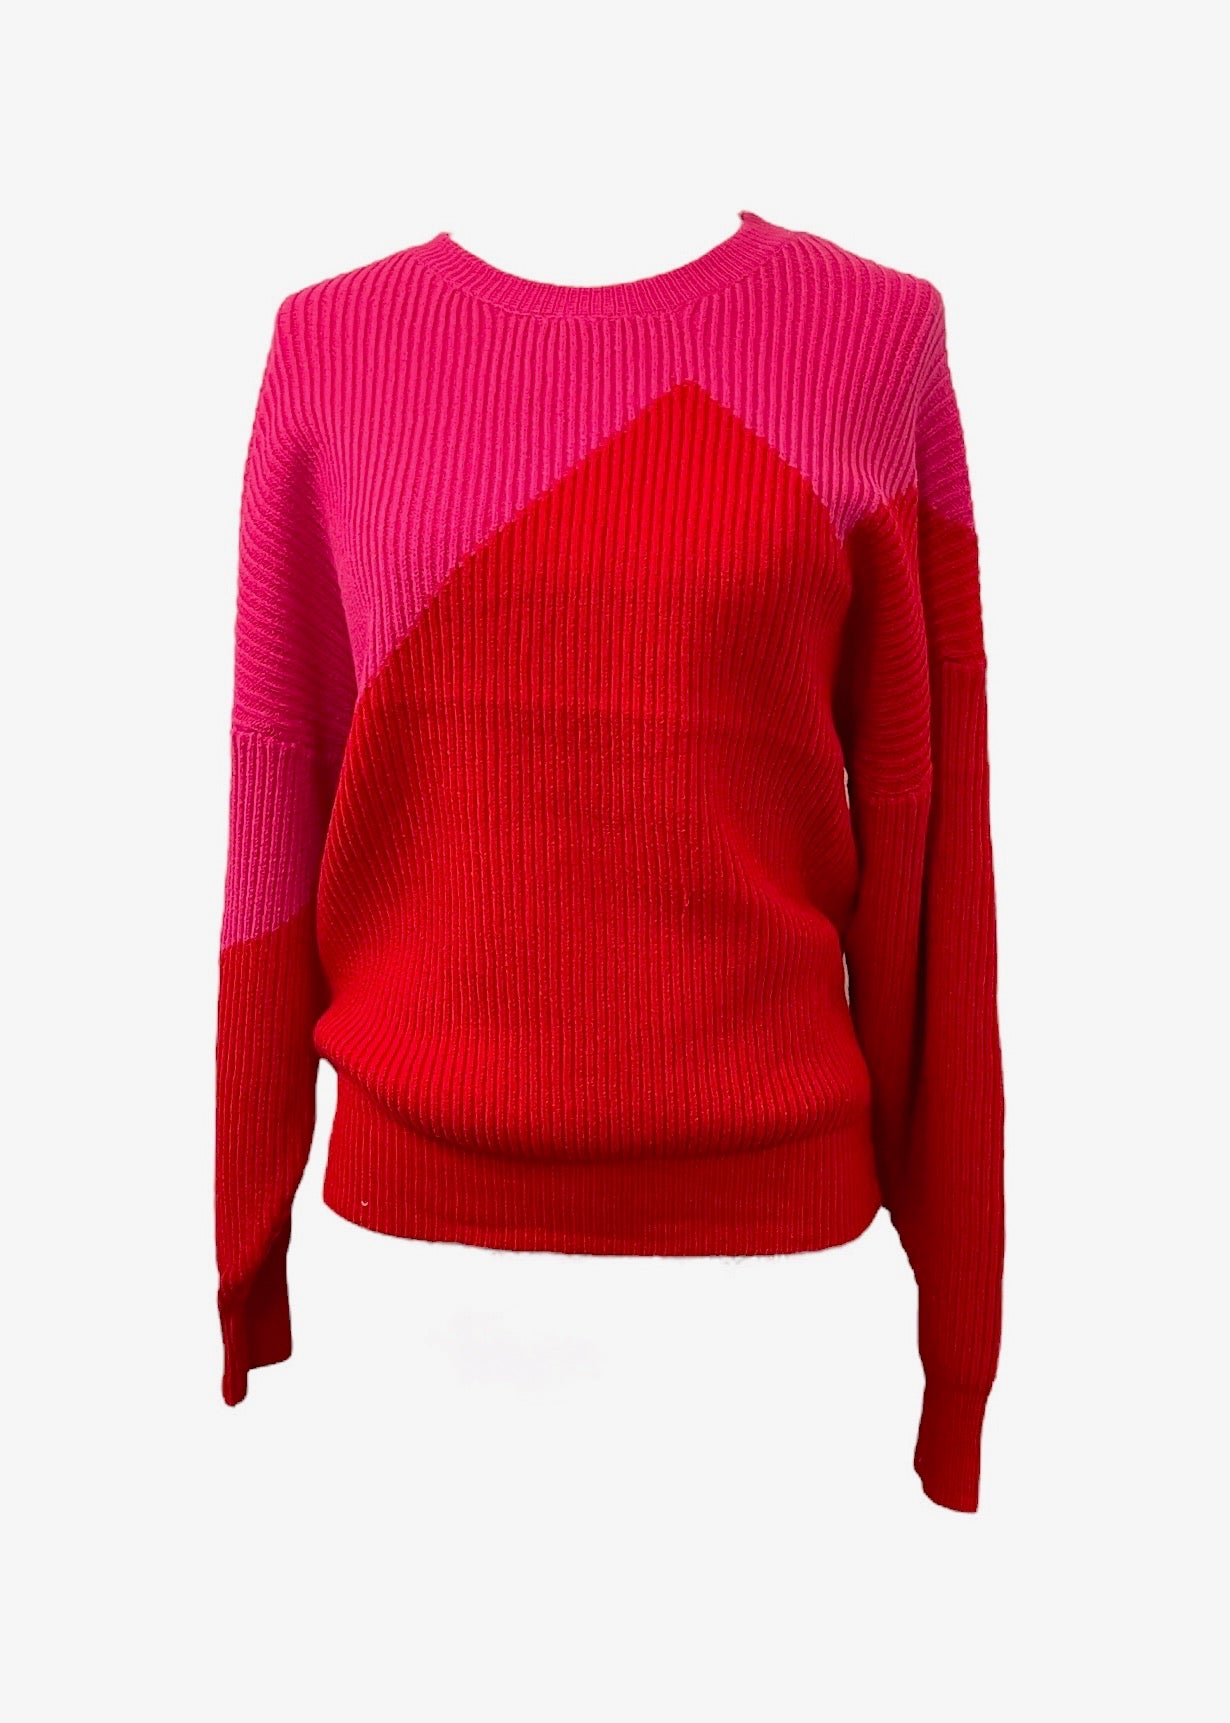 Red/Pink Sweater